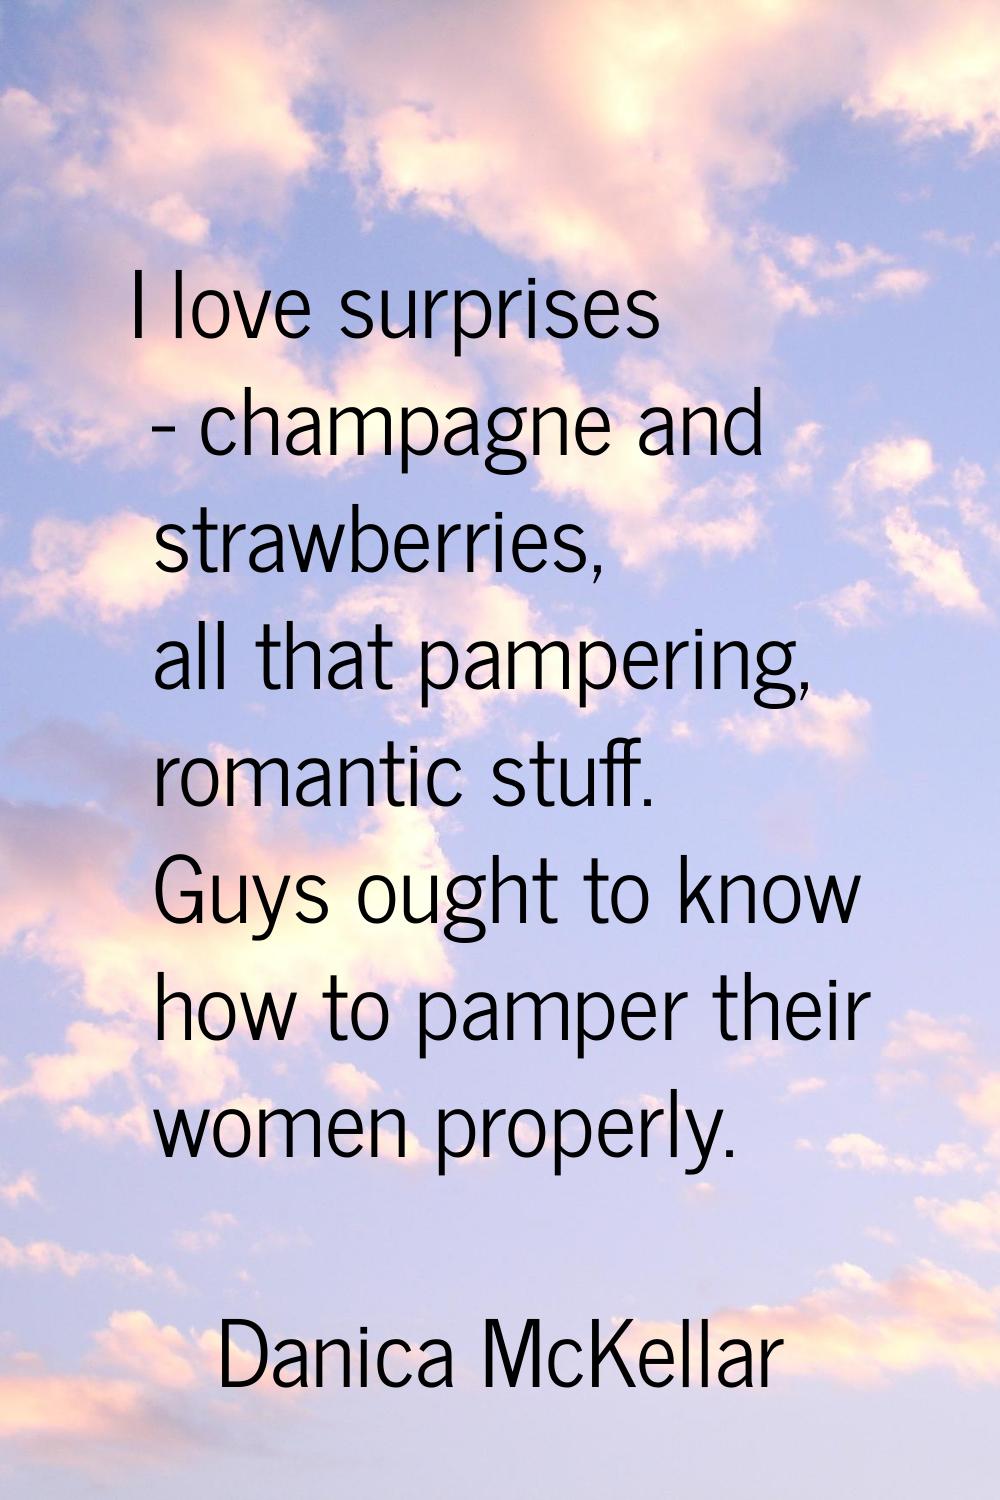 I love surprises - champagne and strawberries, all that pampering, romantic stuff. Guys ought to kn